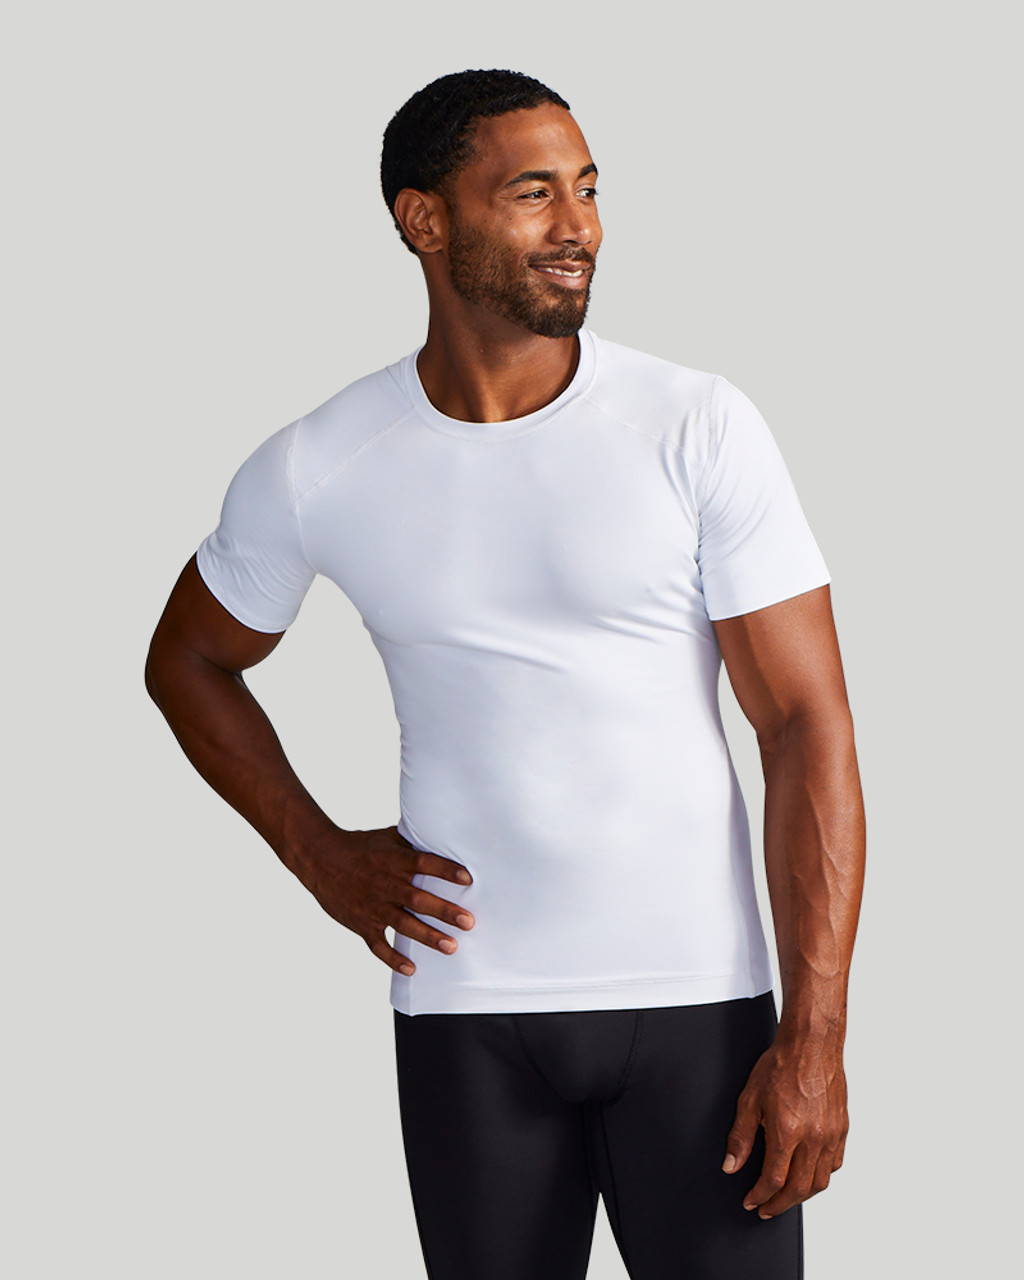 A man wearing a white Tommie Copper Lower Back Support Shirt